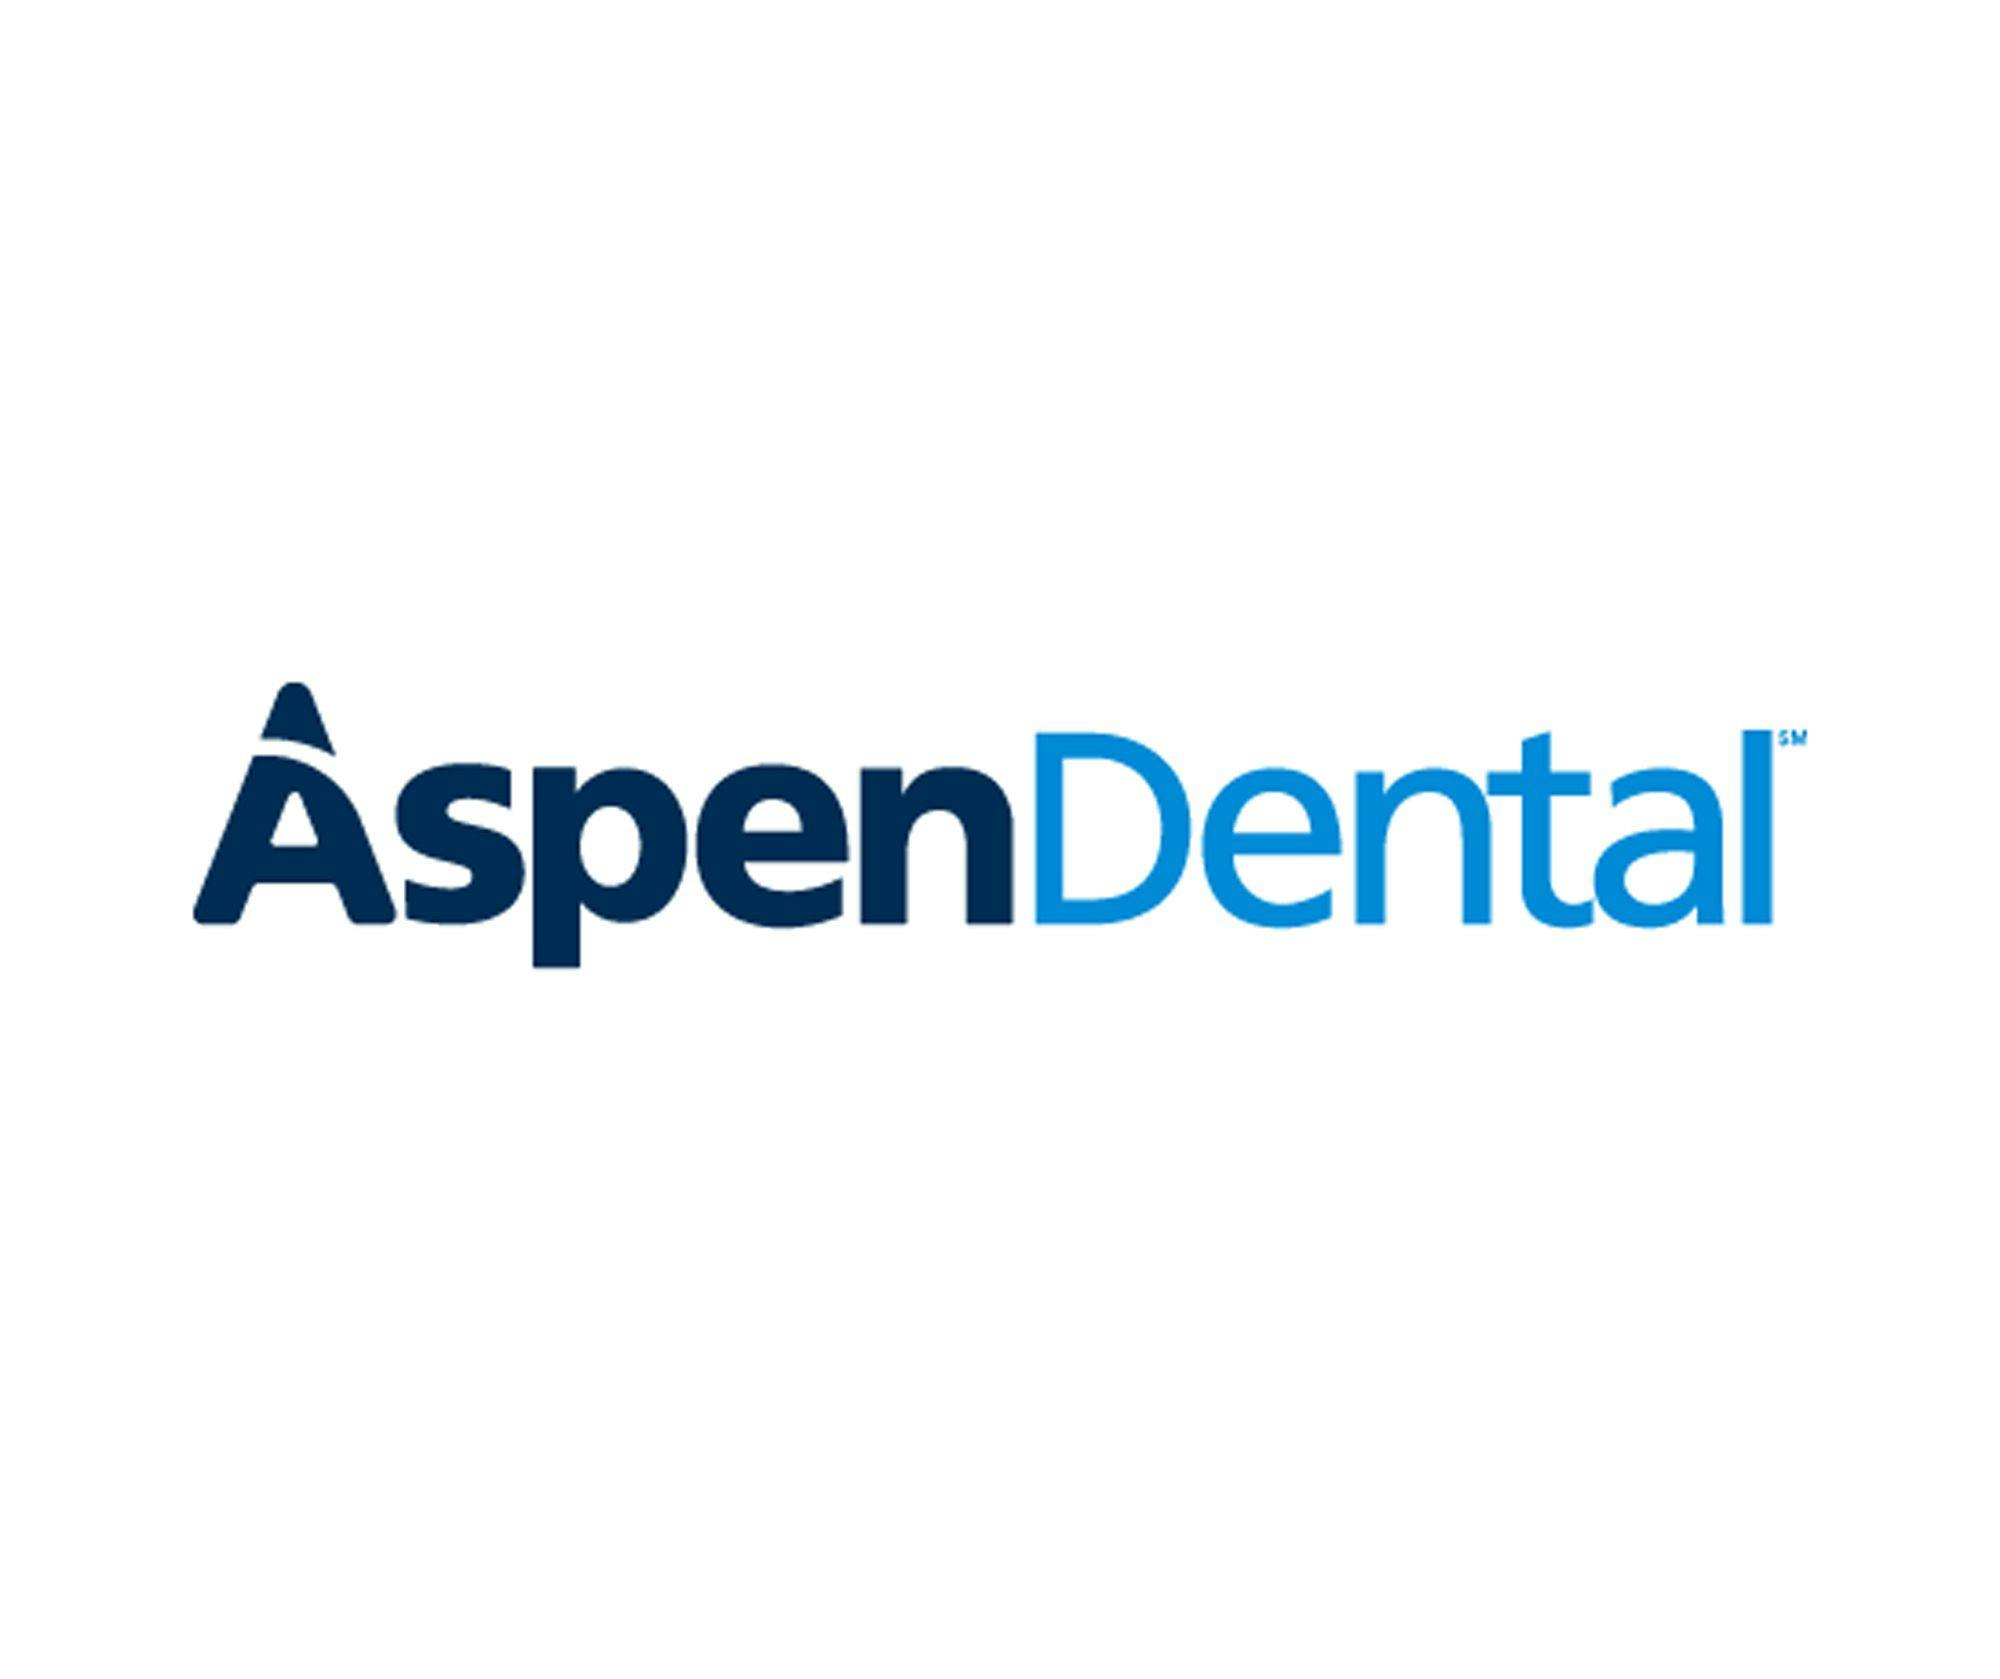 Aspen Dental Announces Partners with the Dental Assisting National Board and the DALE Foundation